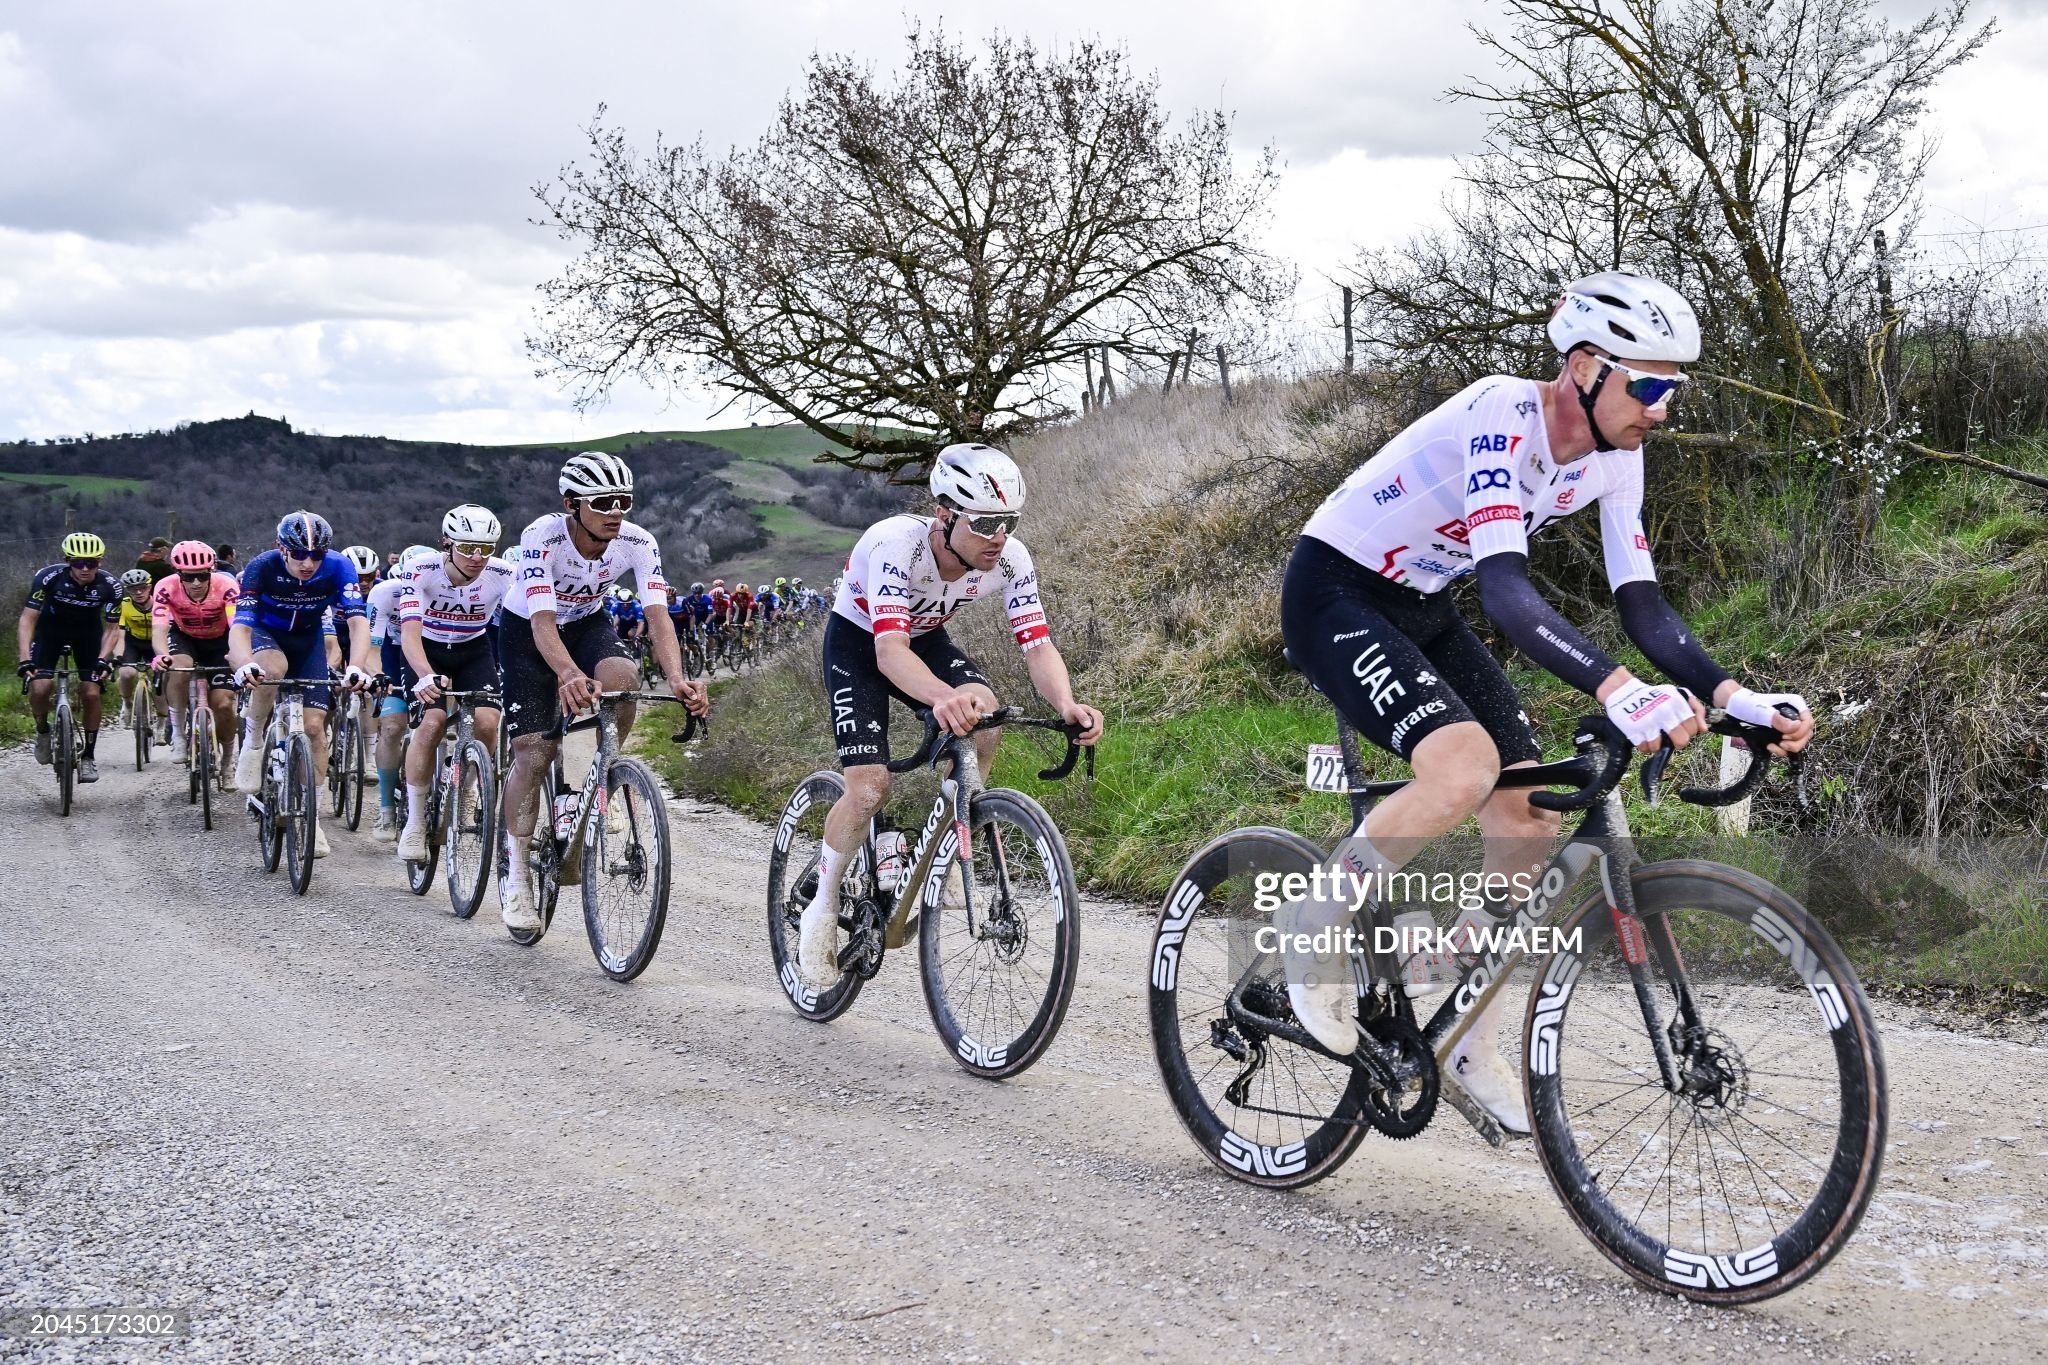 belgian-tim-wellens-of-uae-team-emirates-pictured-in-action-during-the-mens-elite-race-of-the.jpg